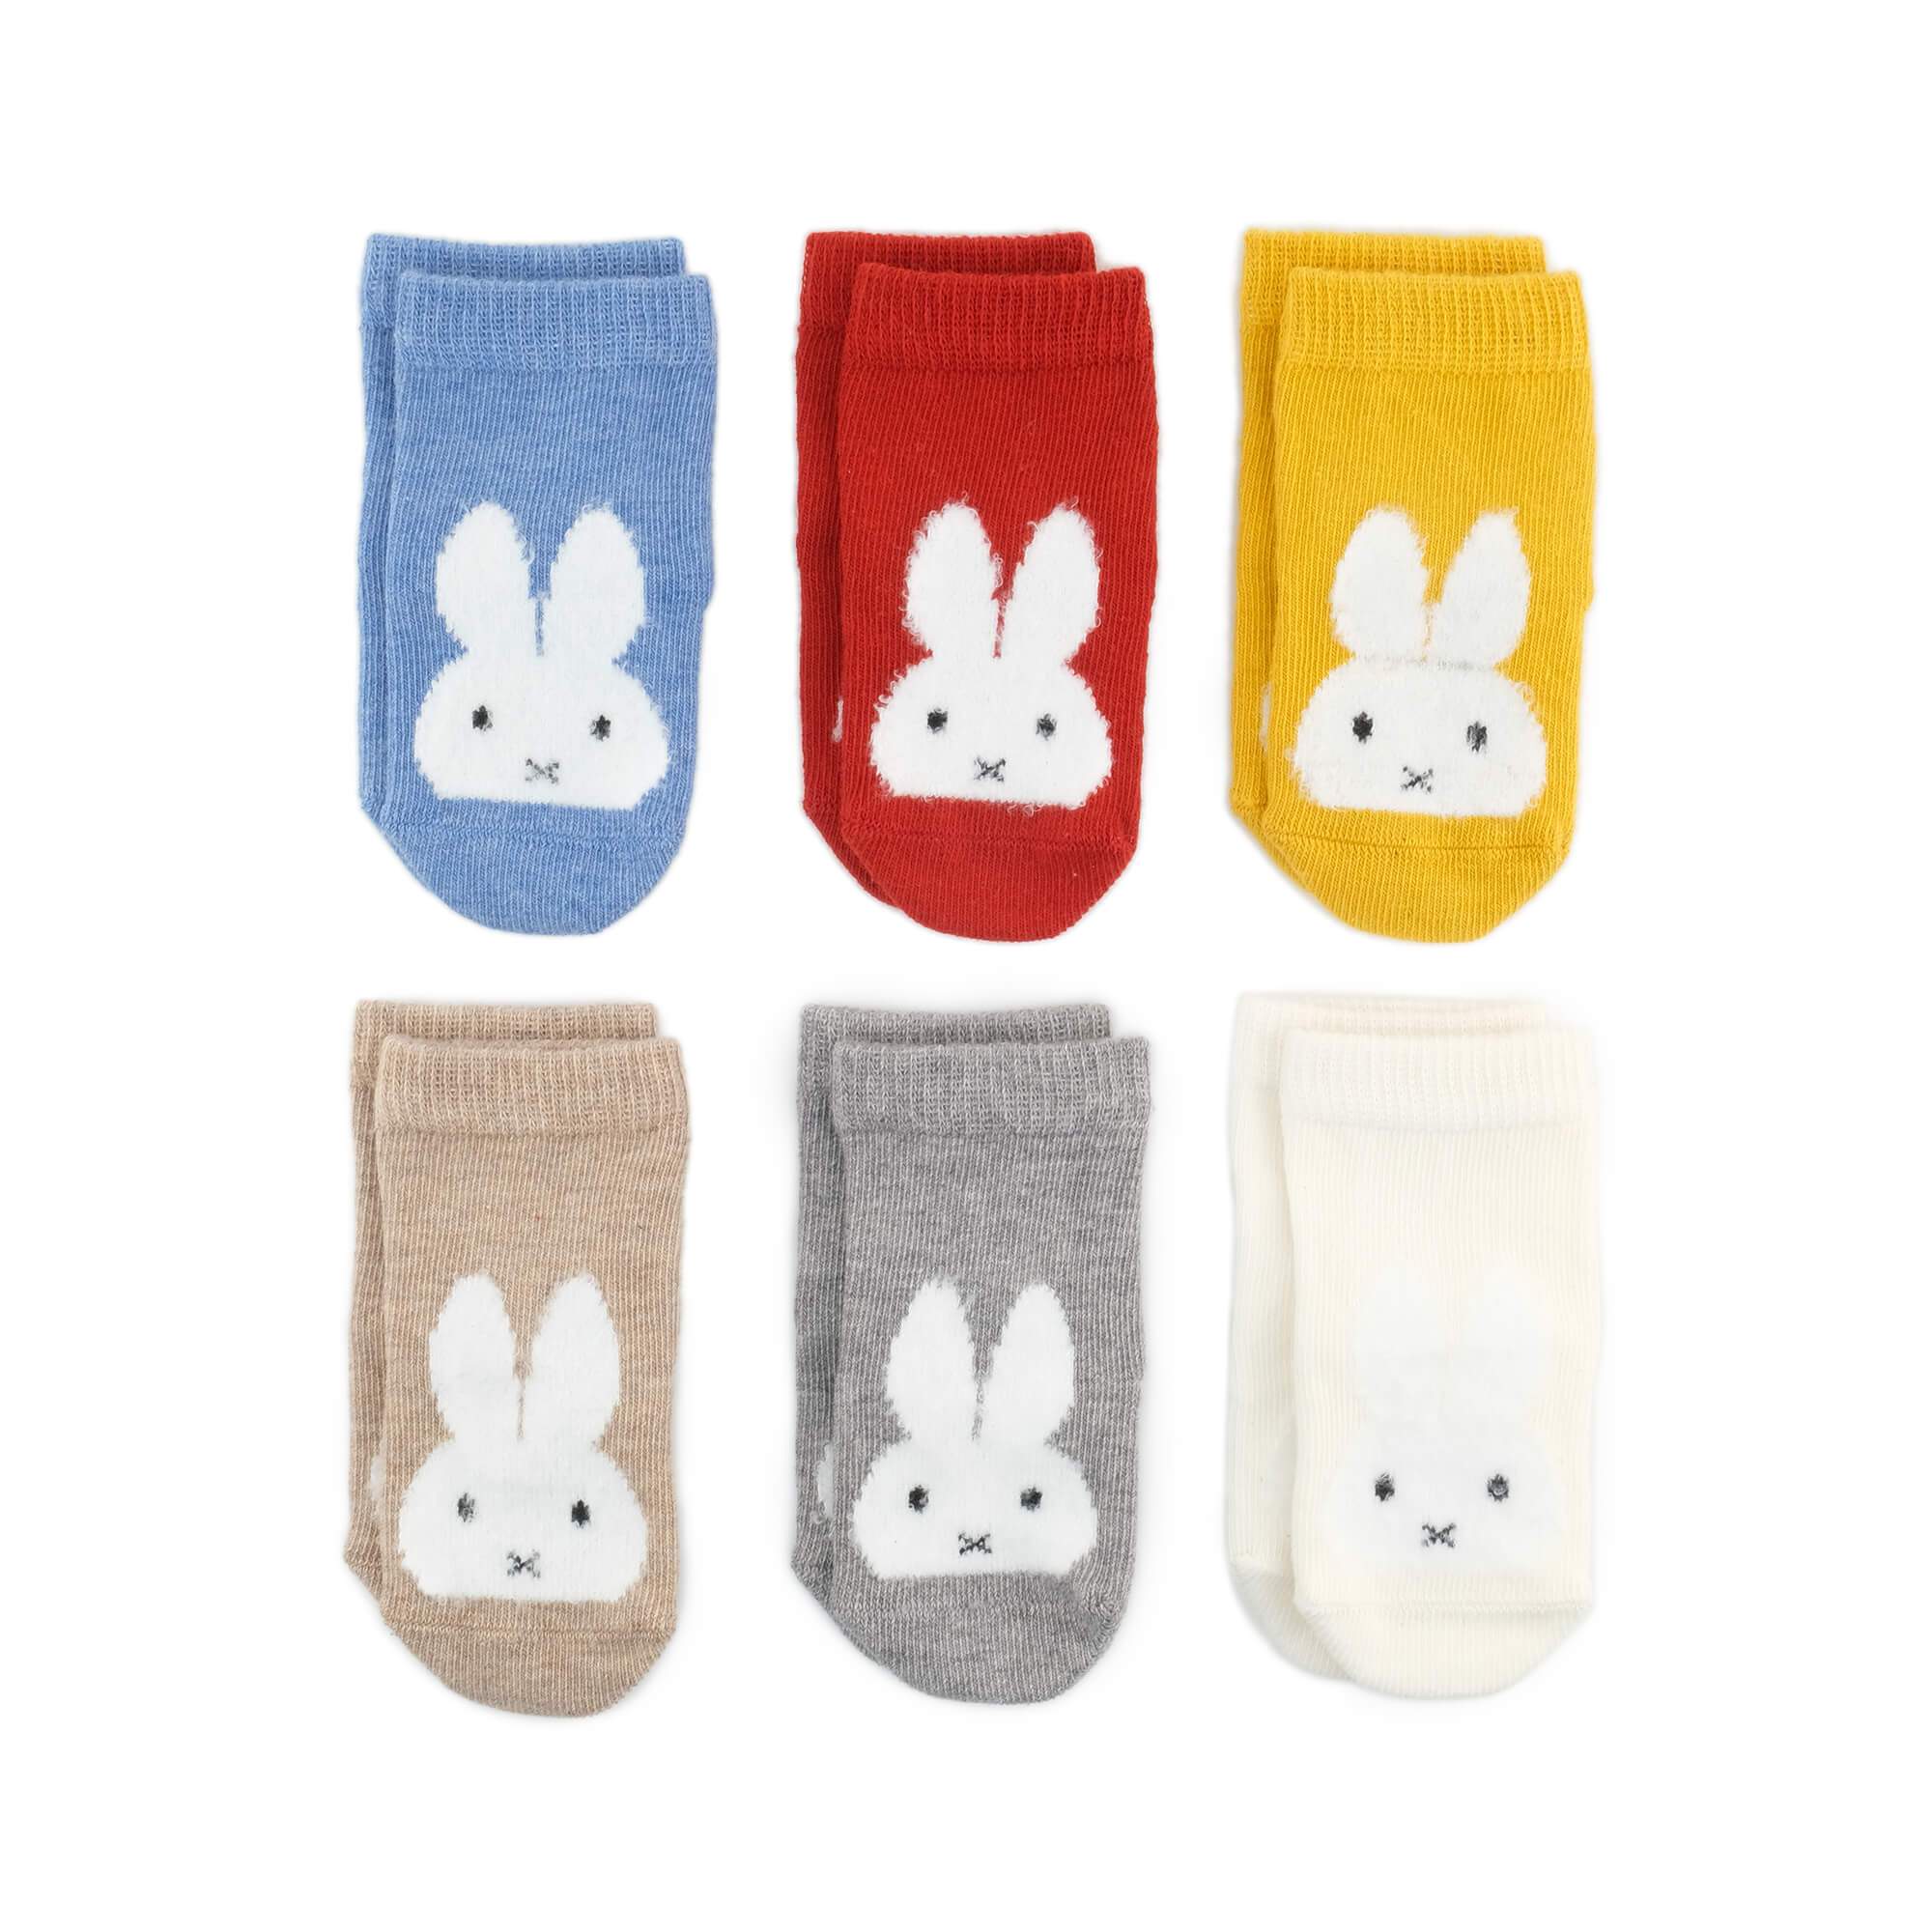 Baby Socks - Miffy x Etiquette Vintage Baby Socks Gift Box - nijntje colorful baby socks - product front view⎪Lil'Etiquette Clothiers